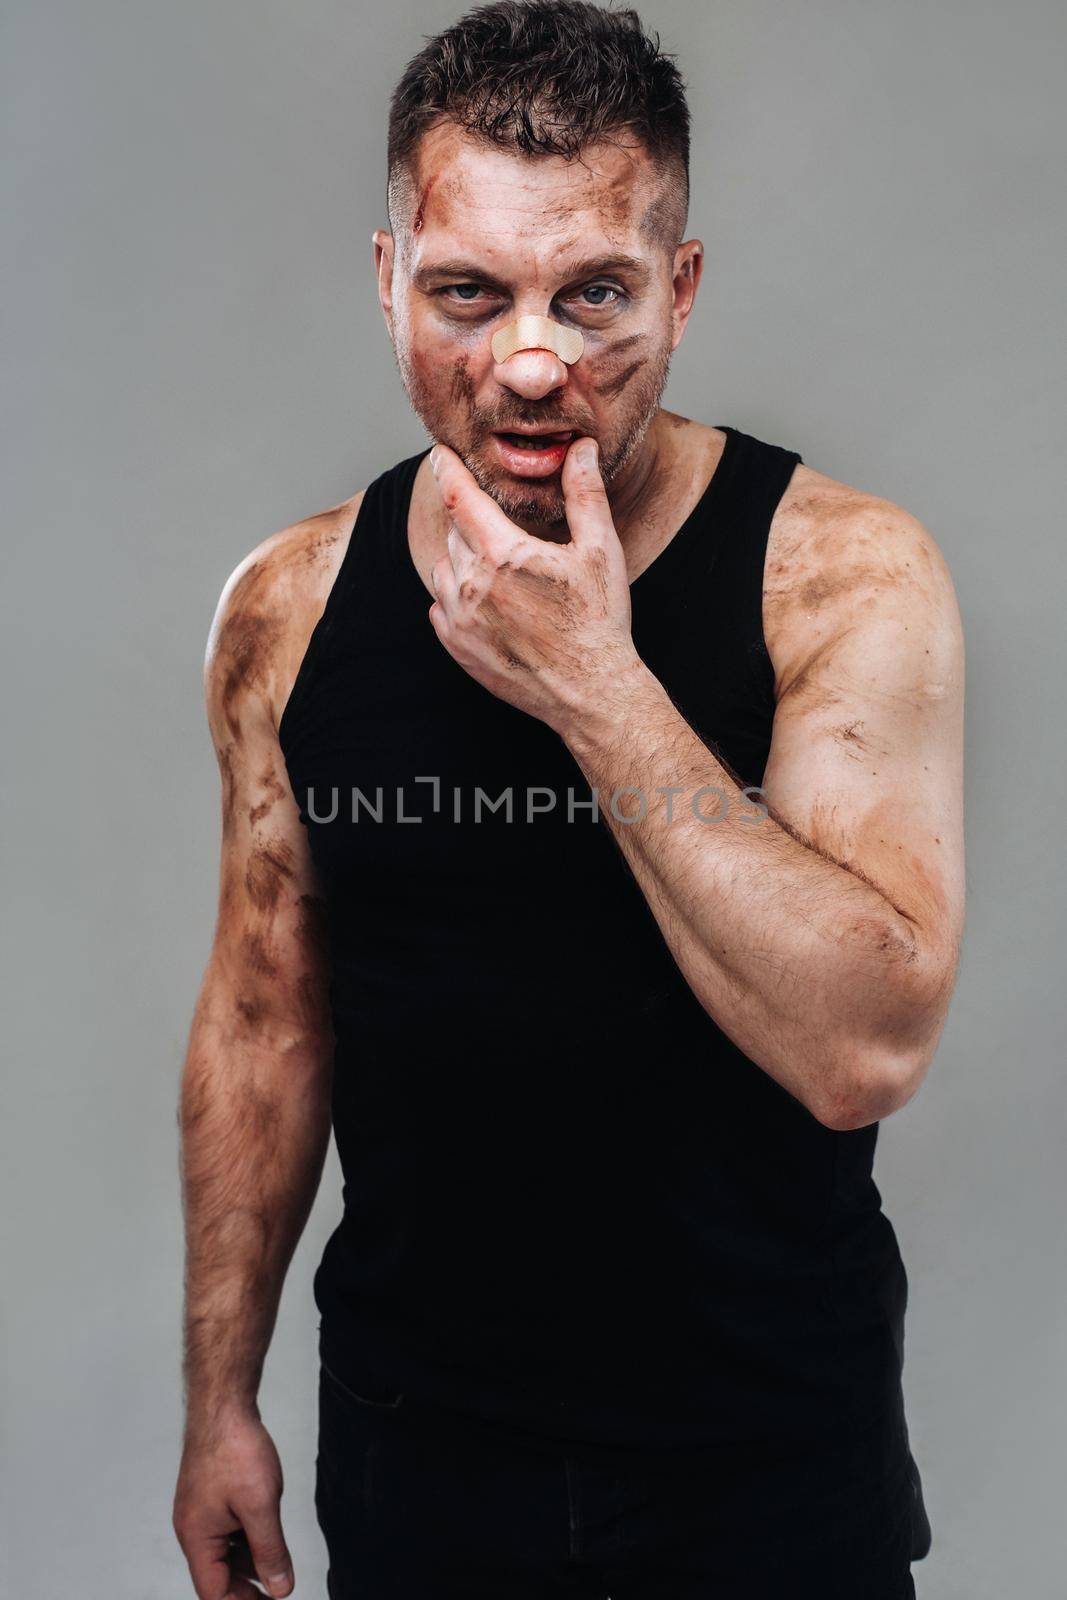 a battered man in a black T shirt who looks like a drug addict and a drunk stands against a gray background.